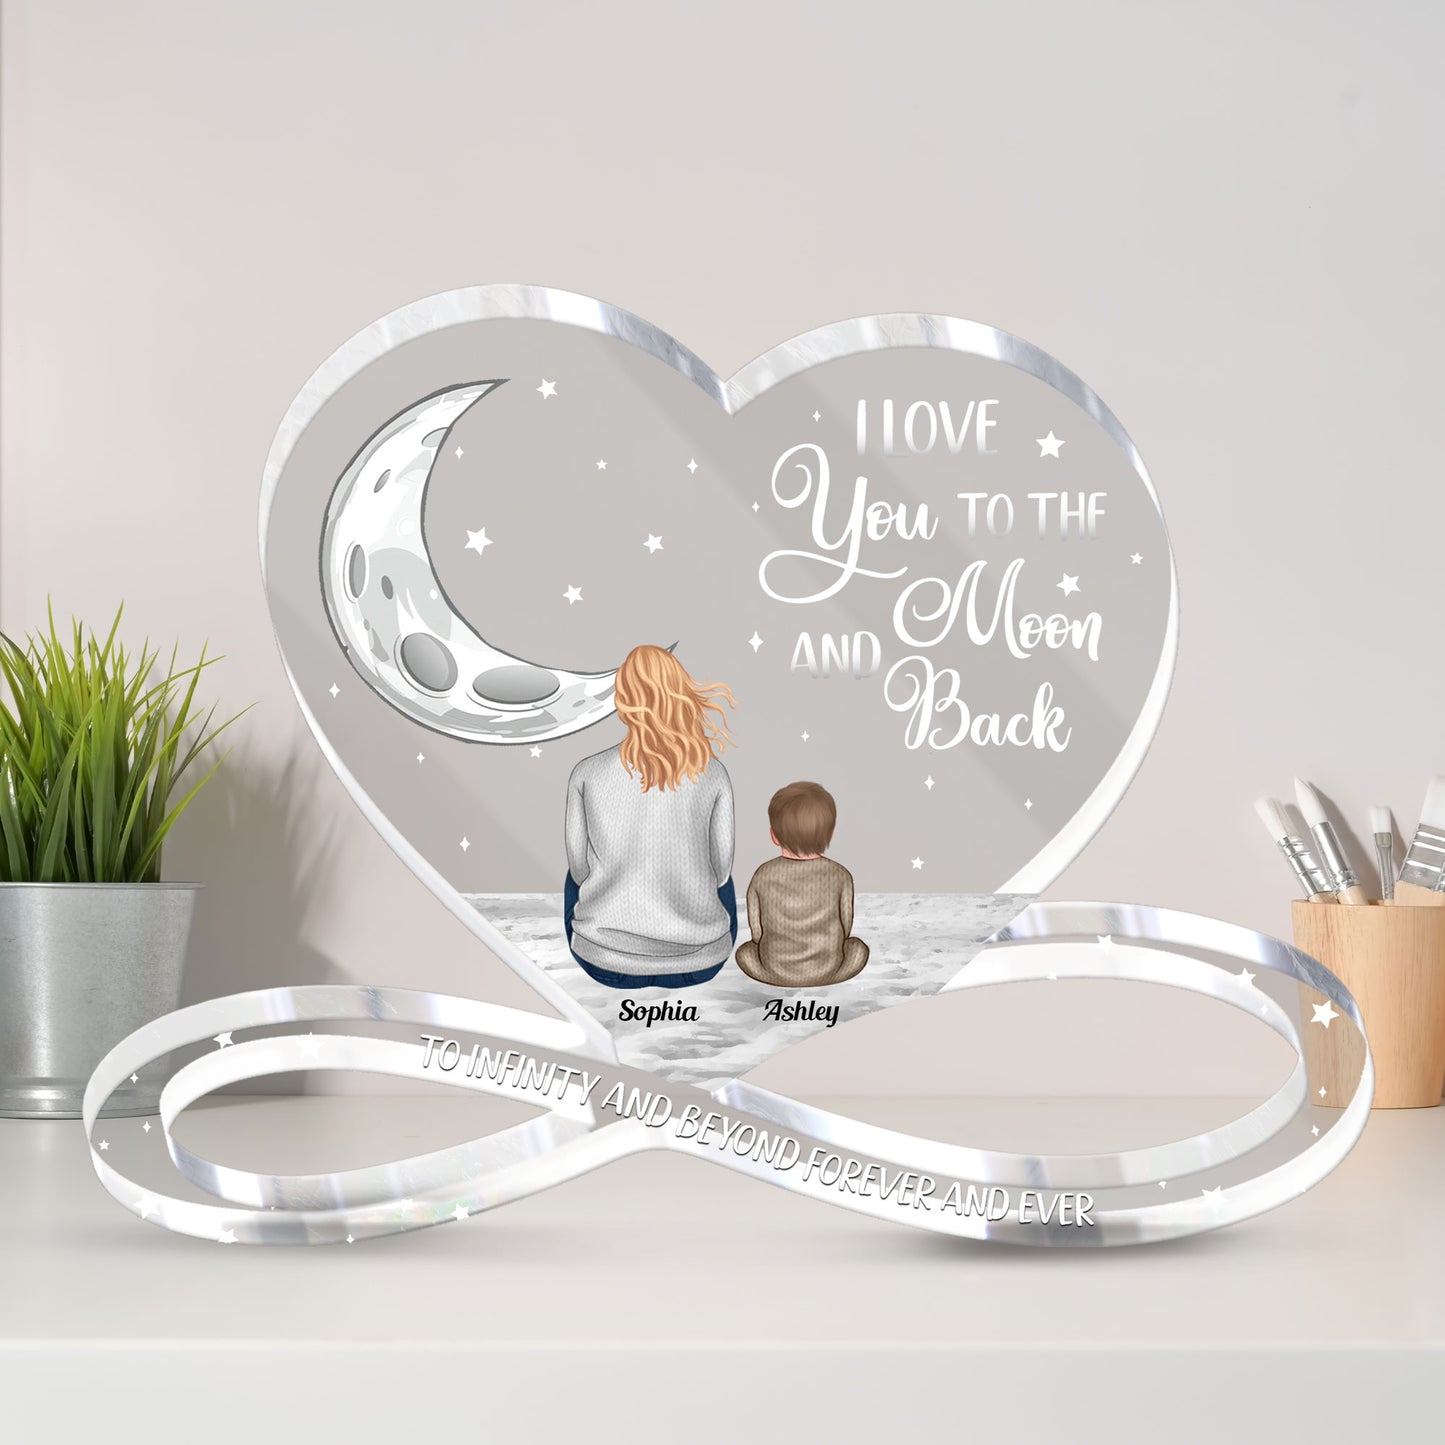 Infinity And Beyond Forever And Ever - Personalized Custom Shaped Acrylic Plaque